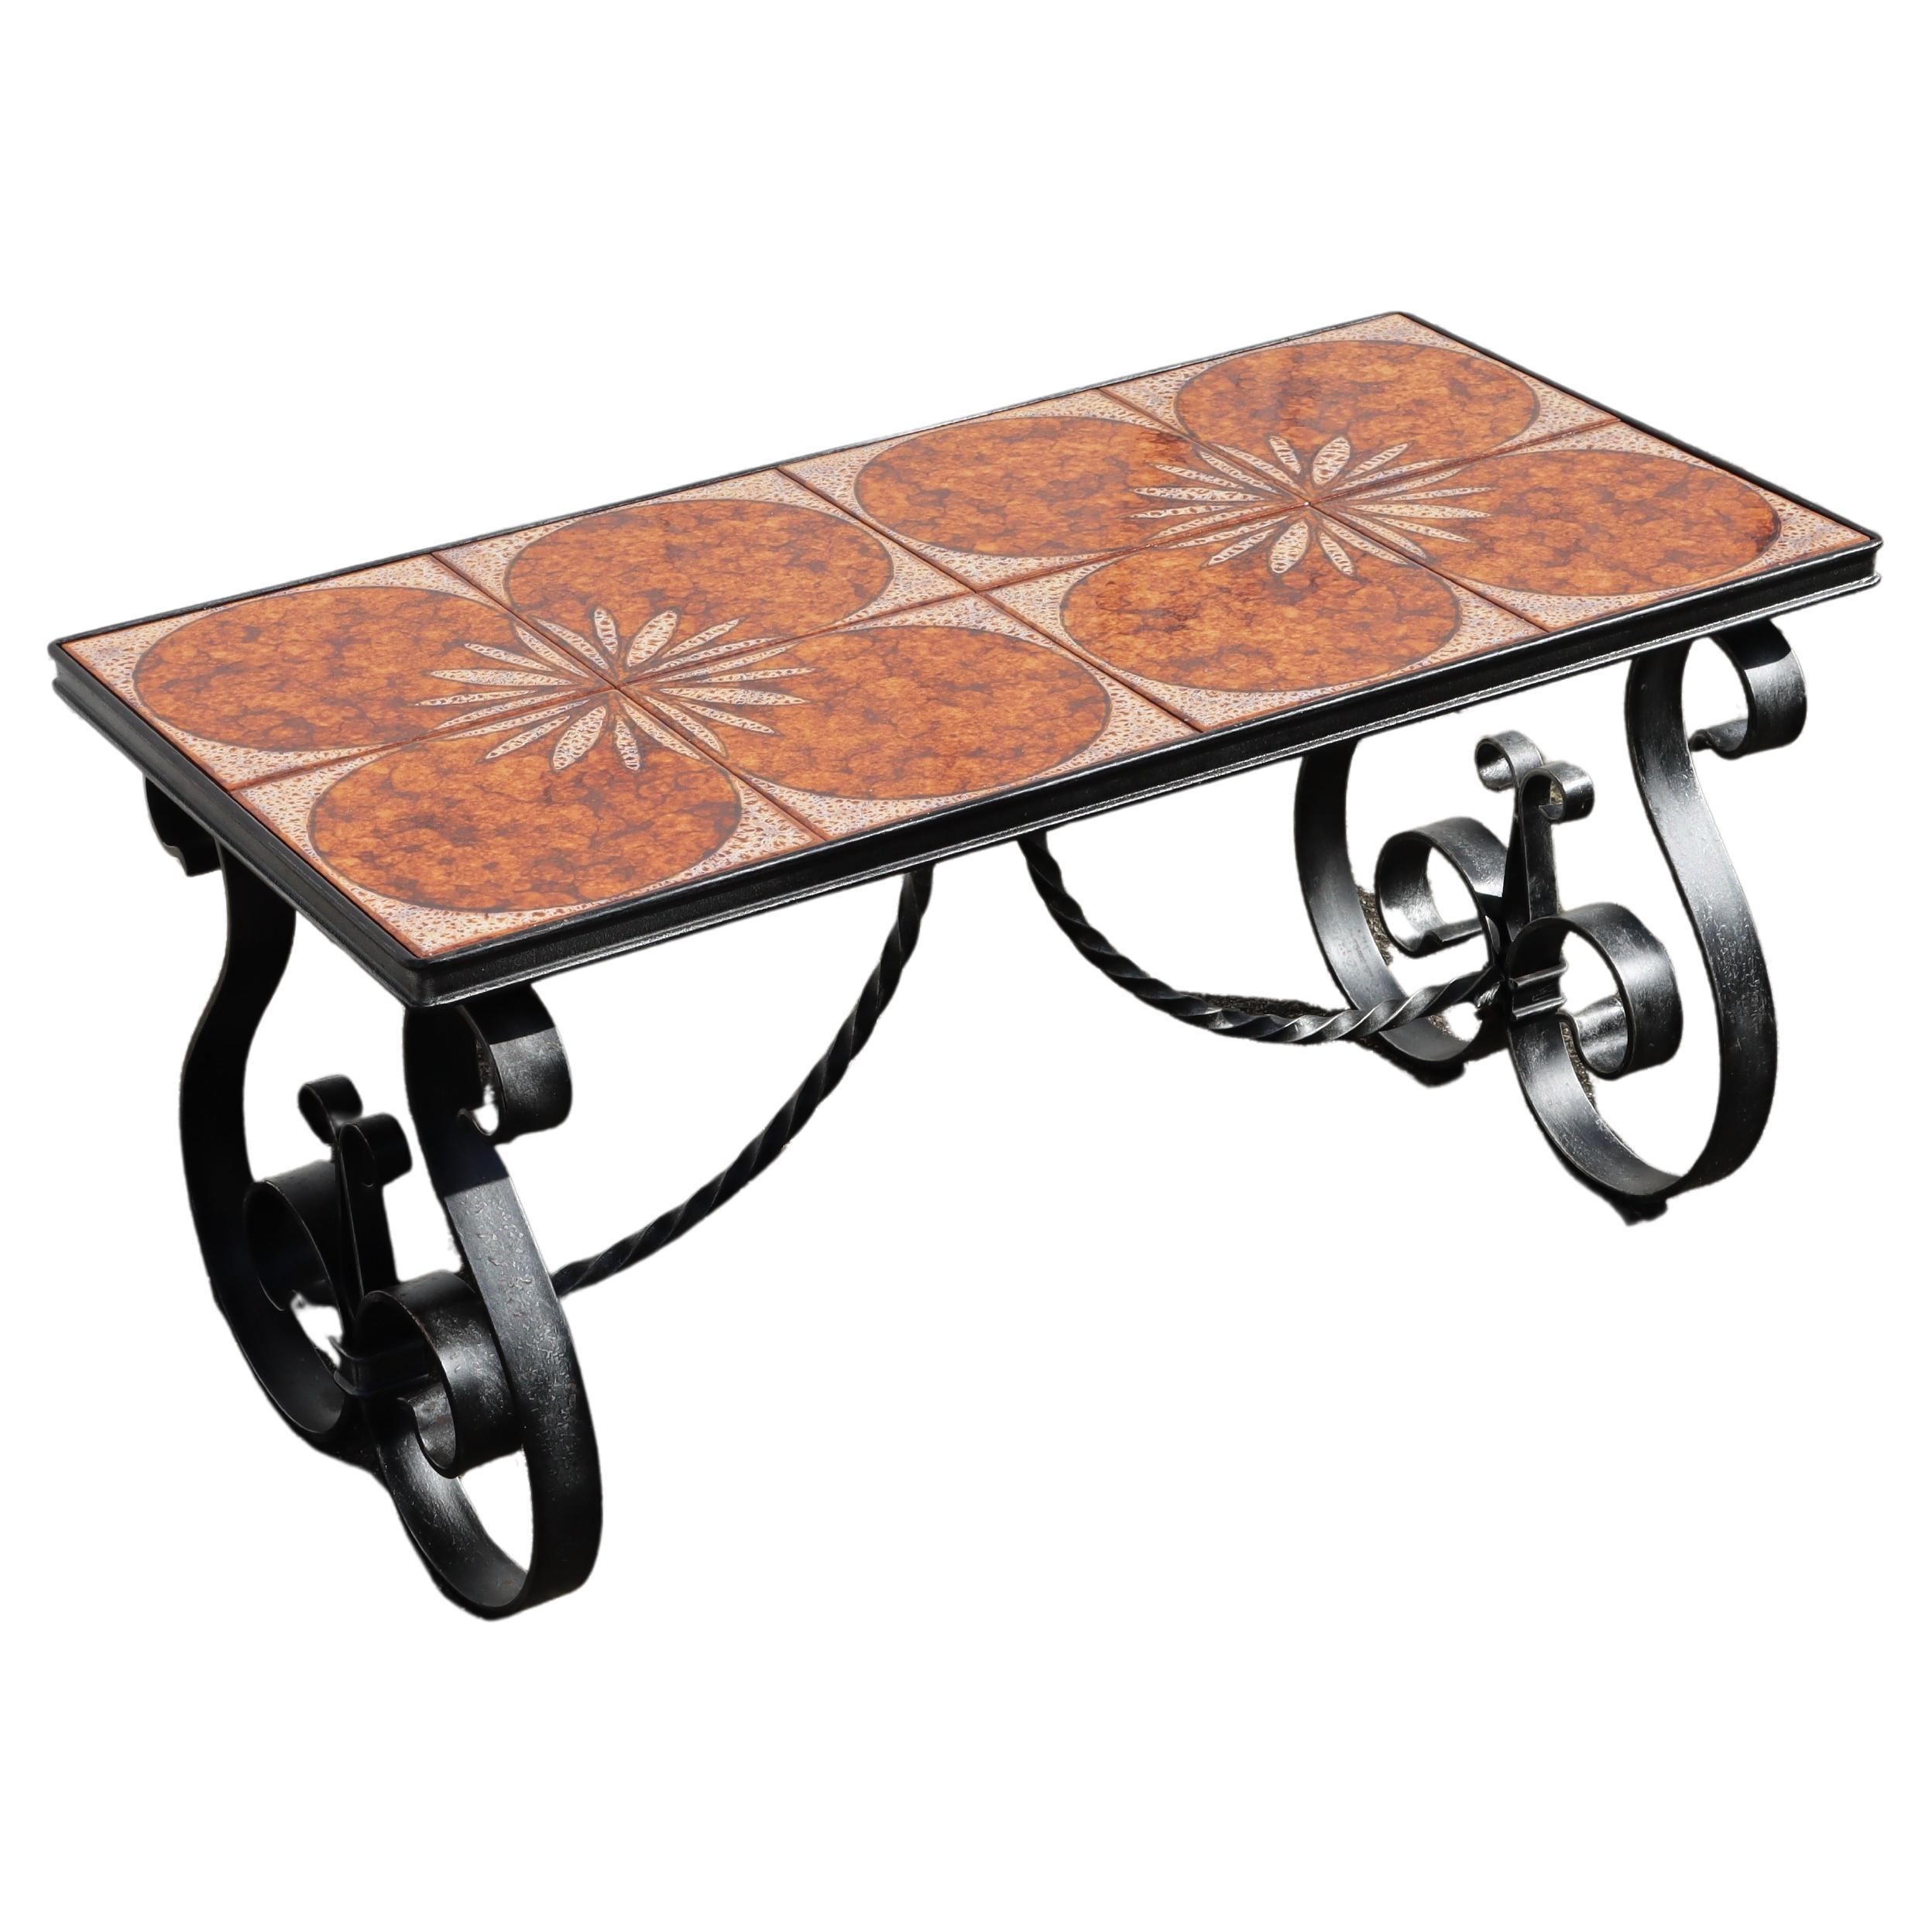 Vintage Forged Iron and Ceramic Coffee Table - Cocktail Table - Patio Table-60s For Sale